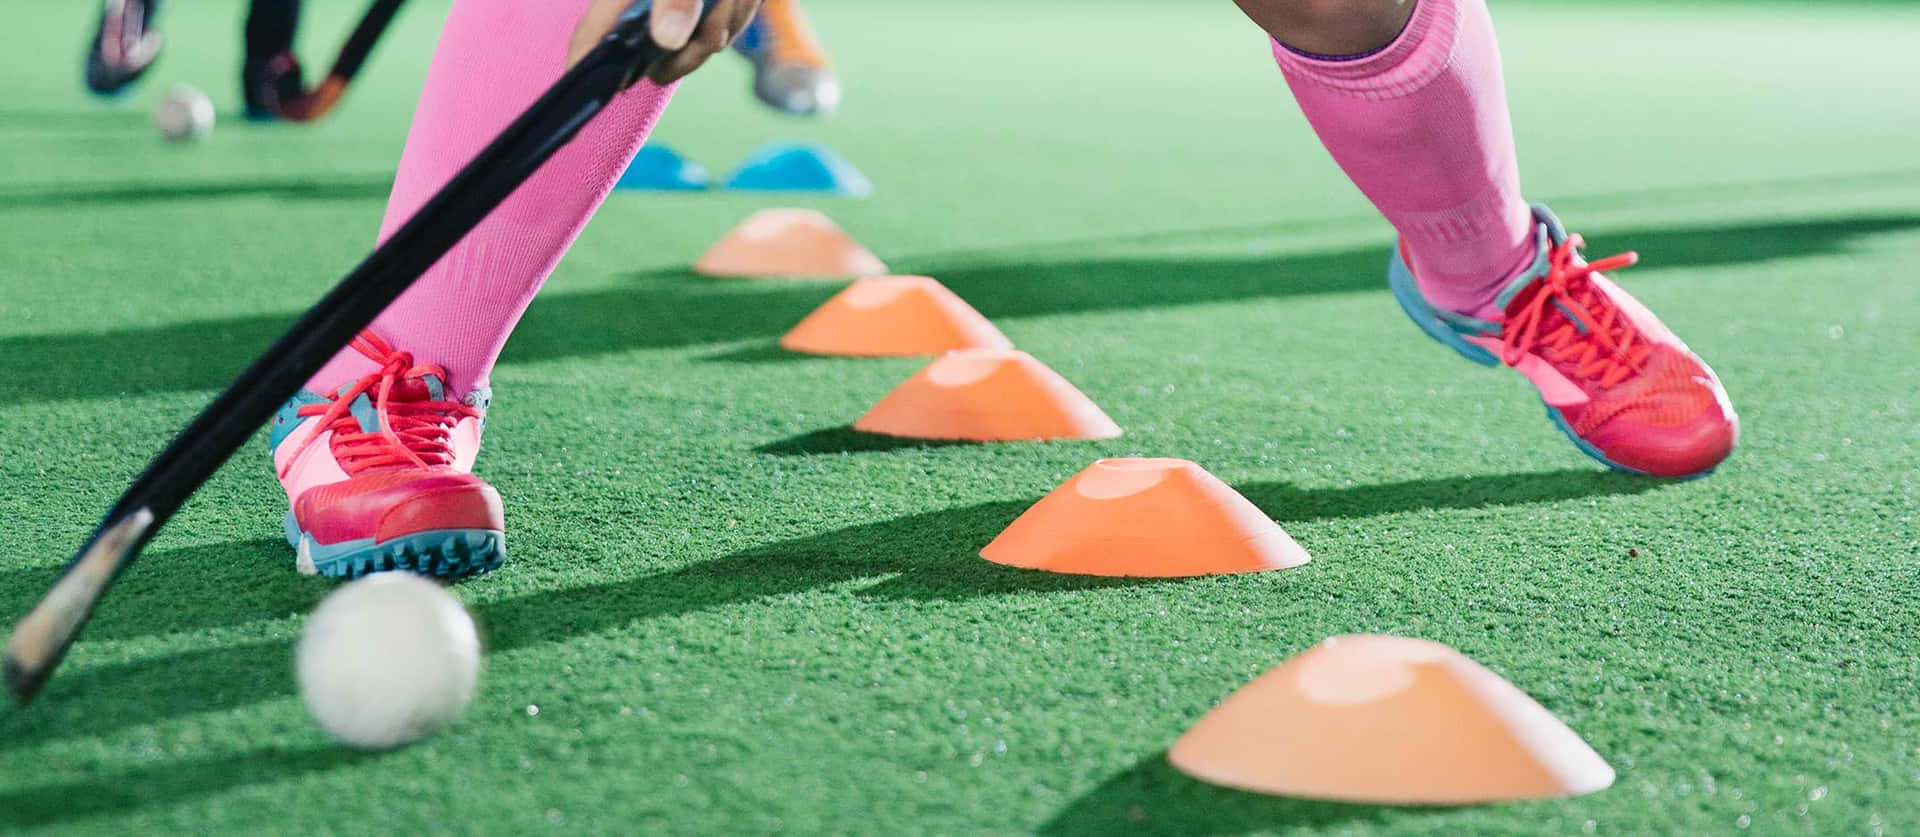 field hockey players playing with cones Wallpaper